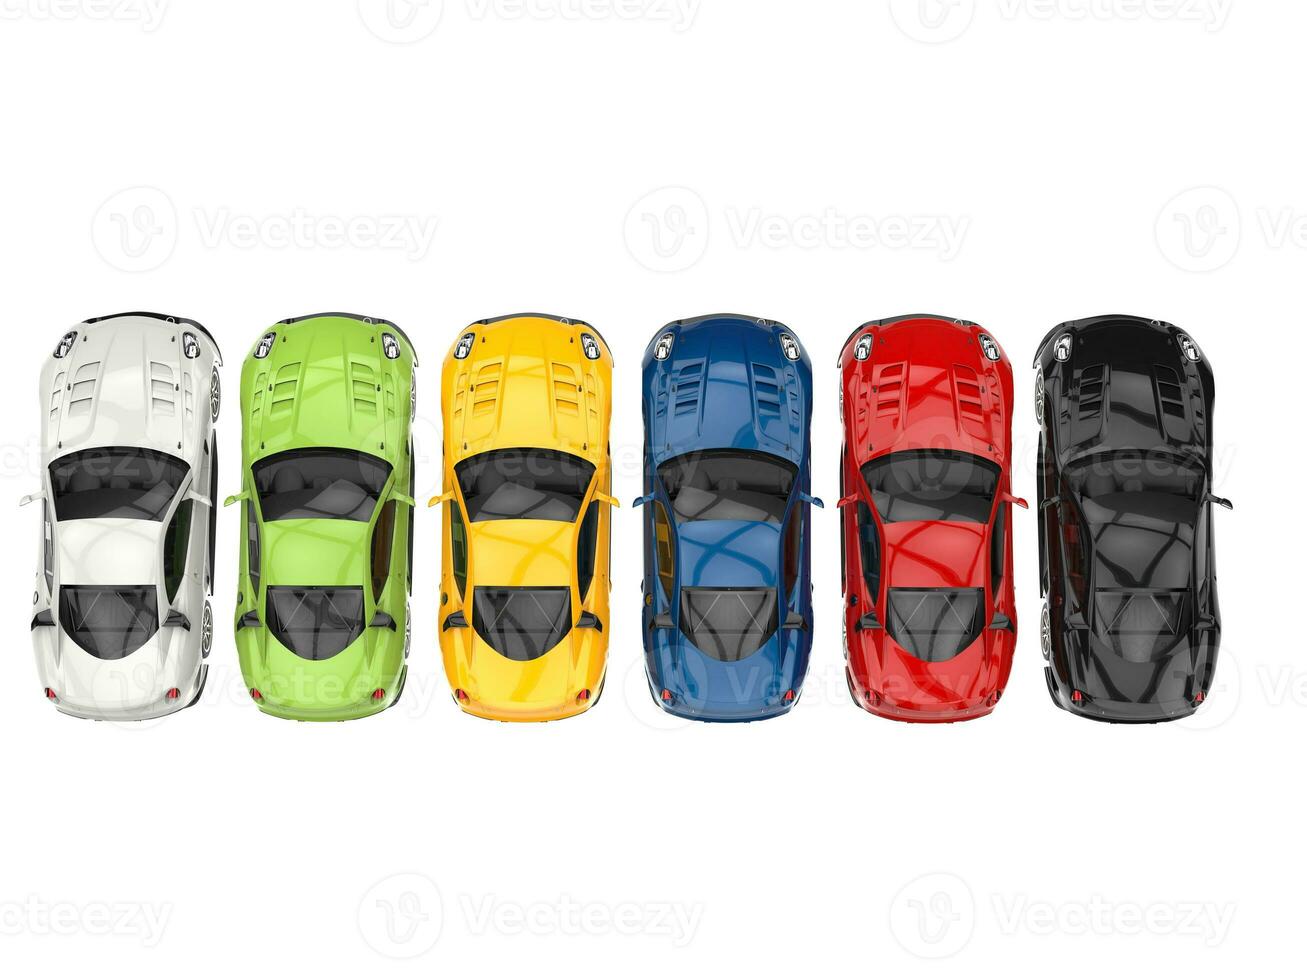 Row of great modern sports cars in various colors - topdown view photo